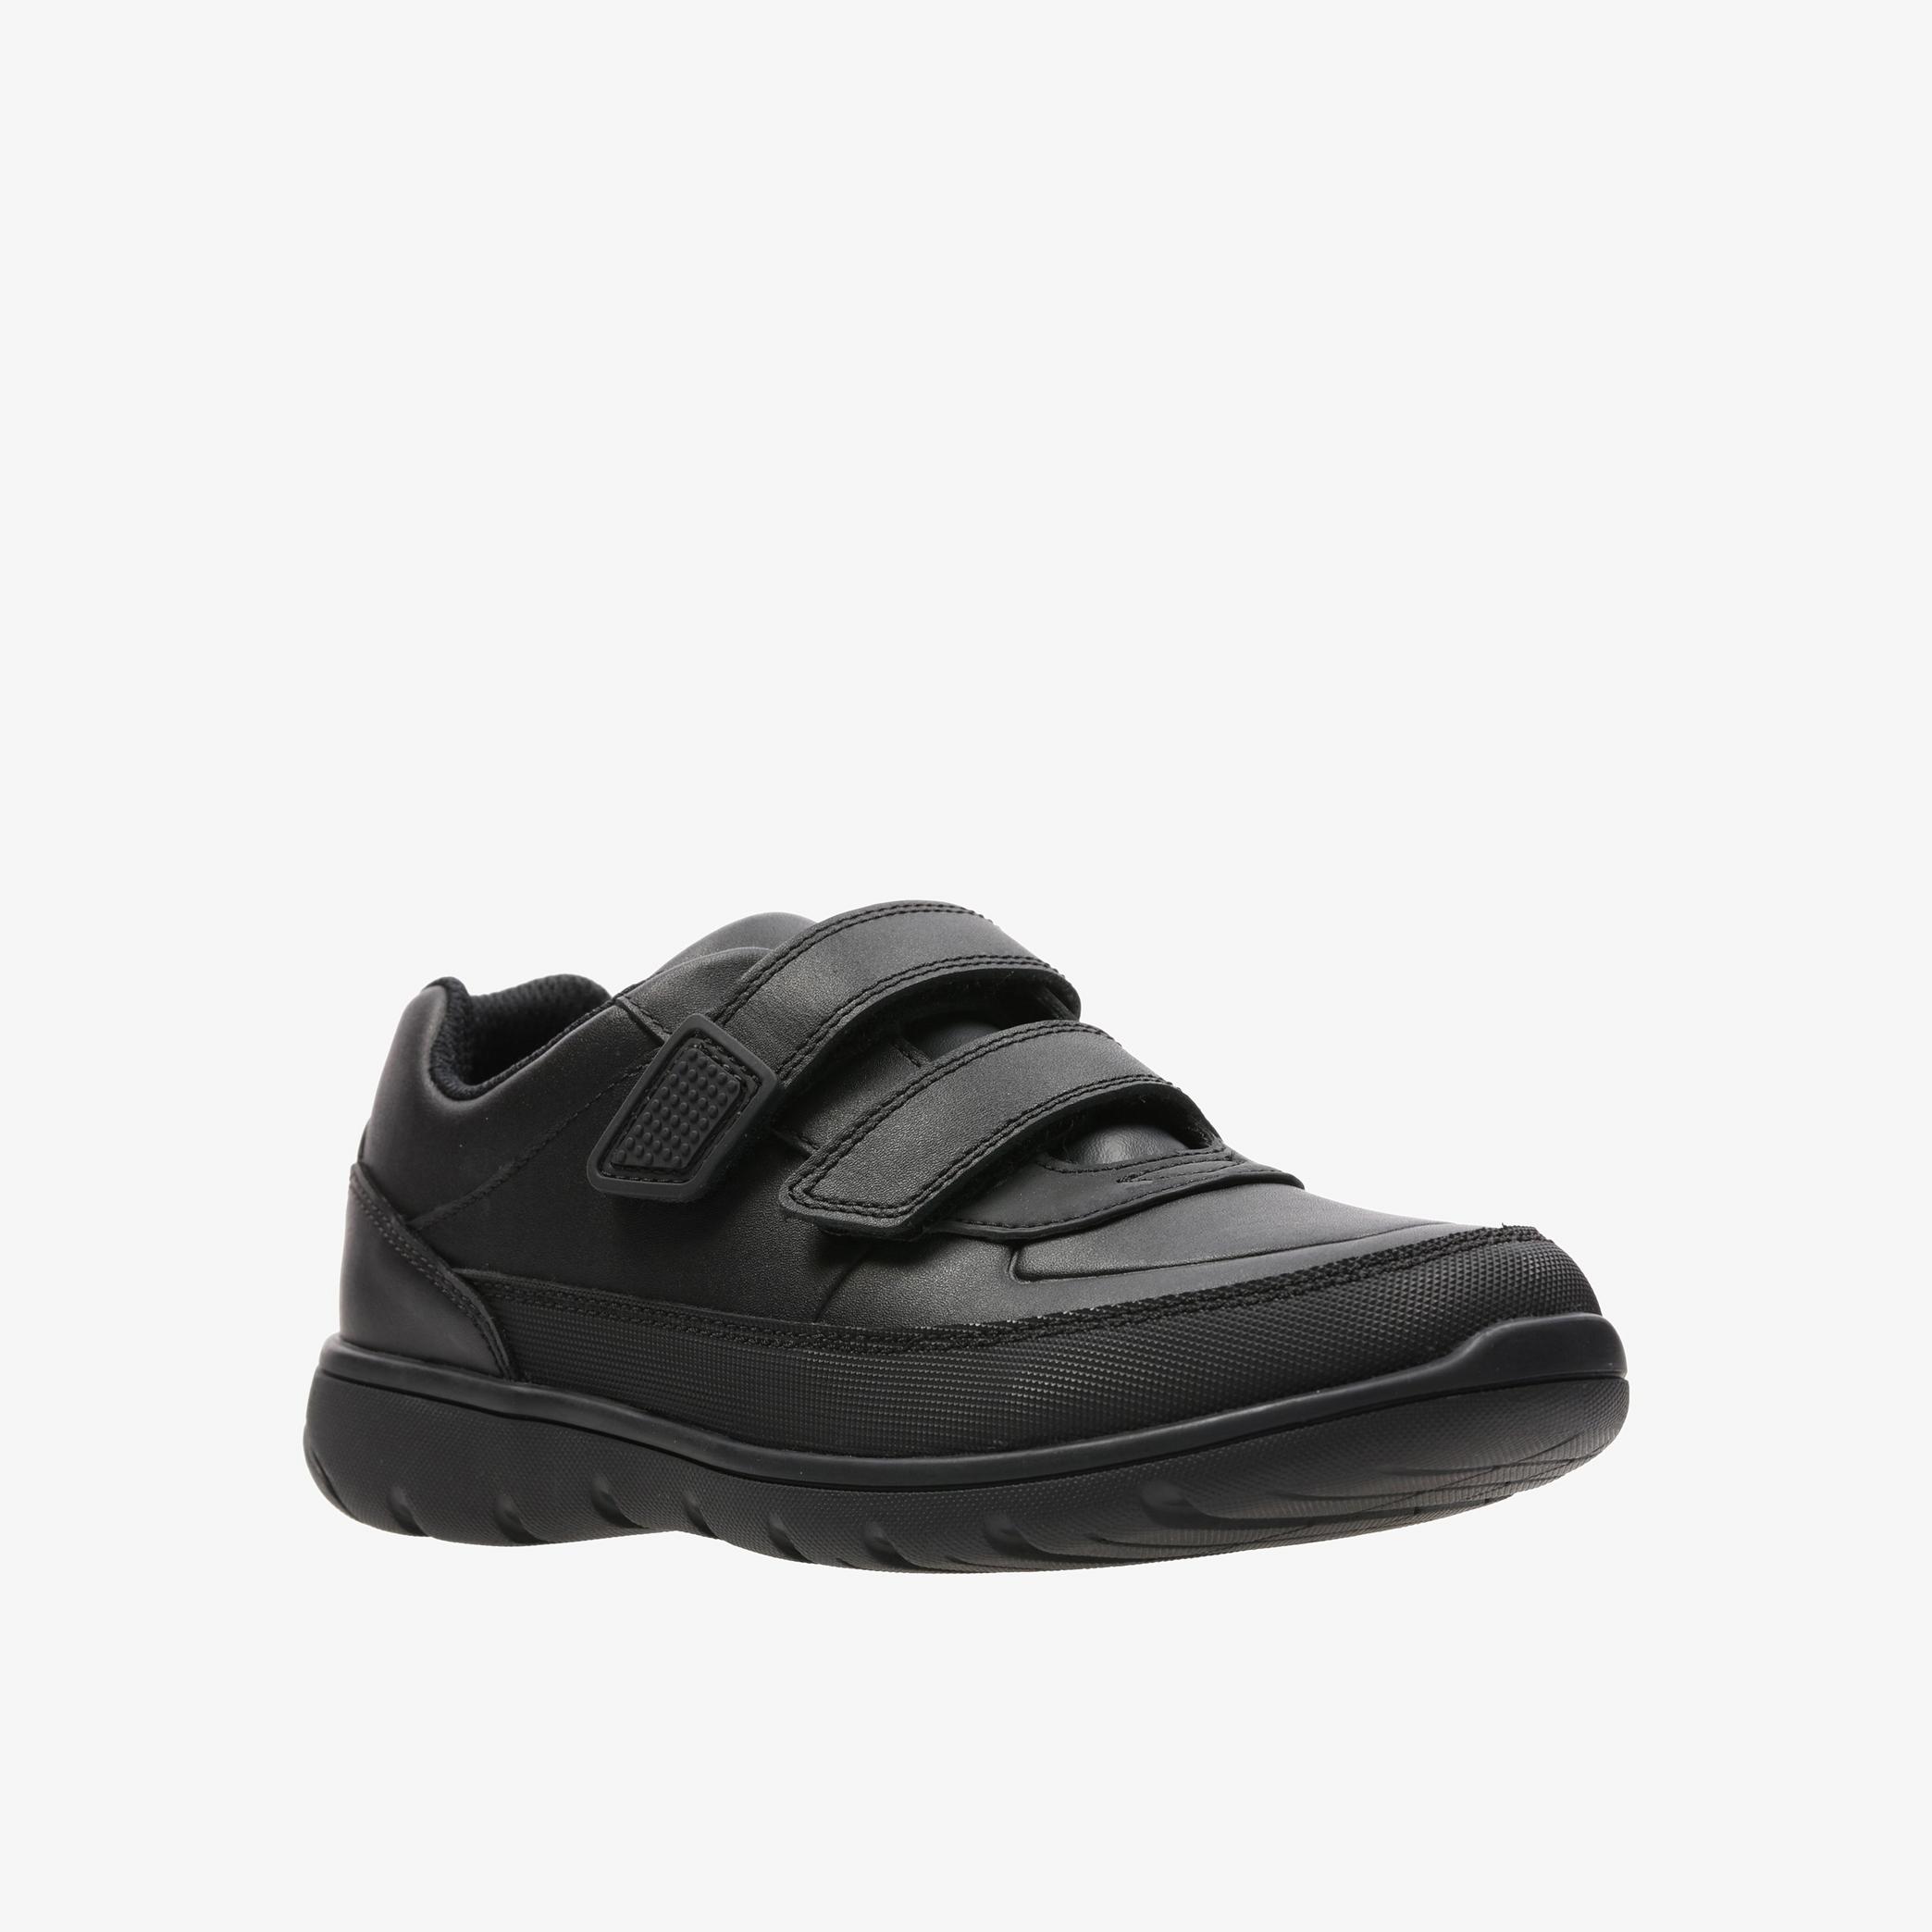 Venture Walk Kid Black Leather Shoes, view 3 of 6